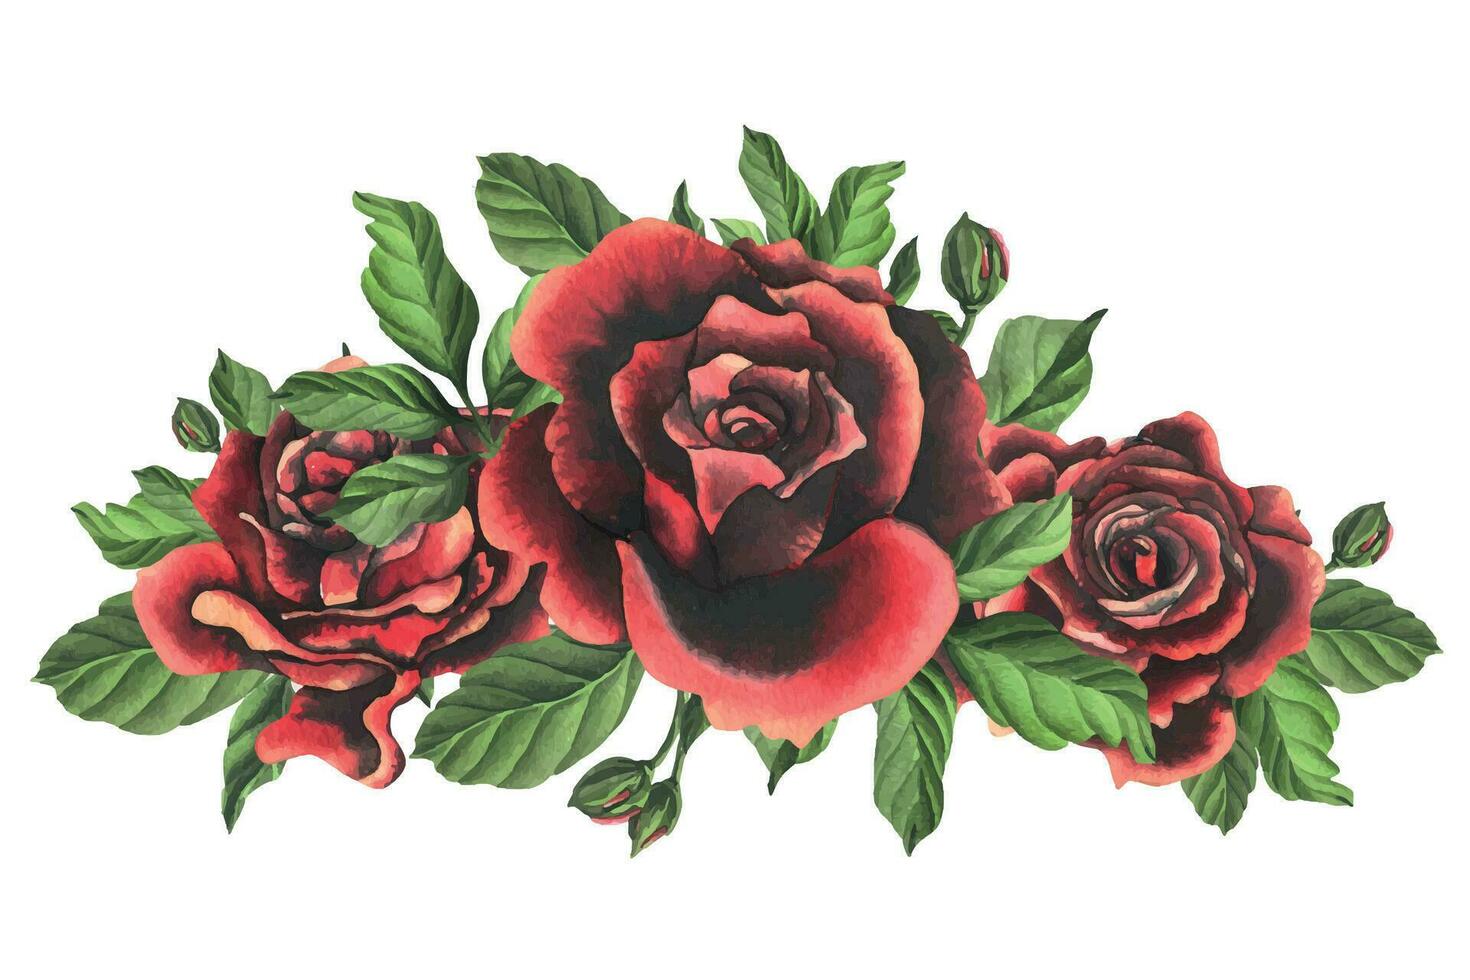 Redblack rose flowers with green leaves and buds, chic, bright, beautiful. Hand drawn watercolor illustration. Isolated composition on a white background, for decoration and design. vector